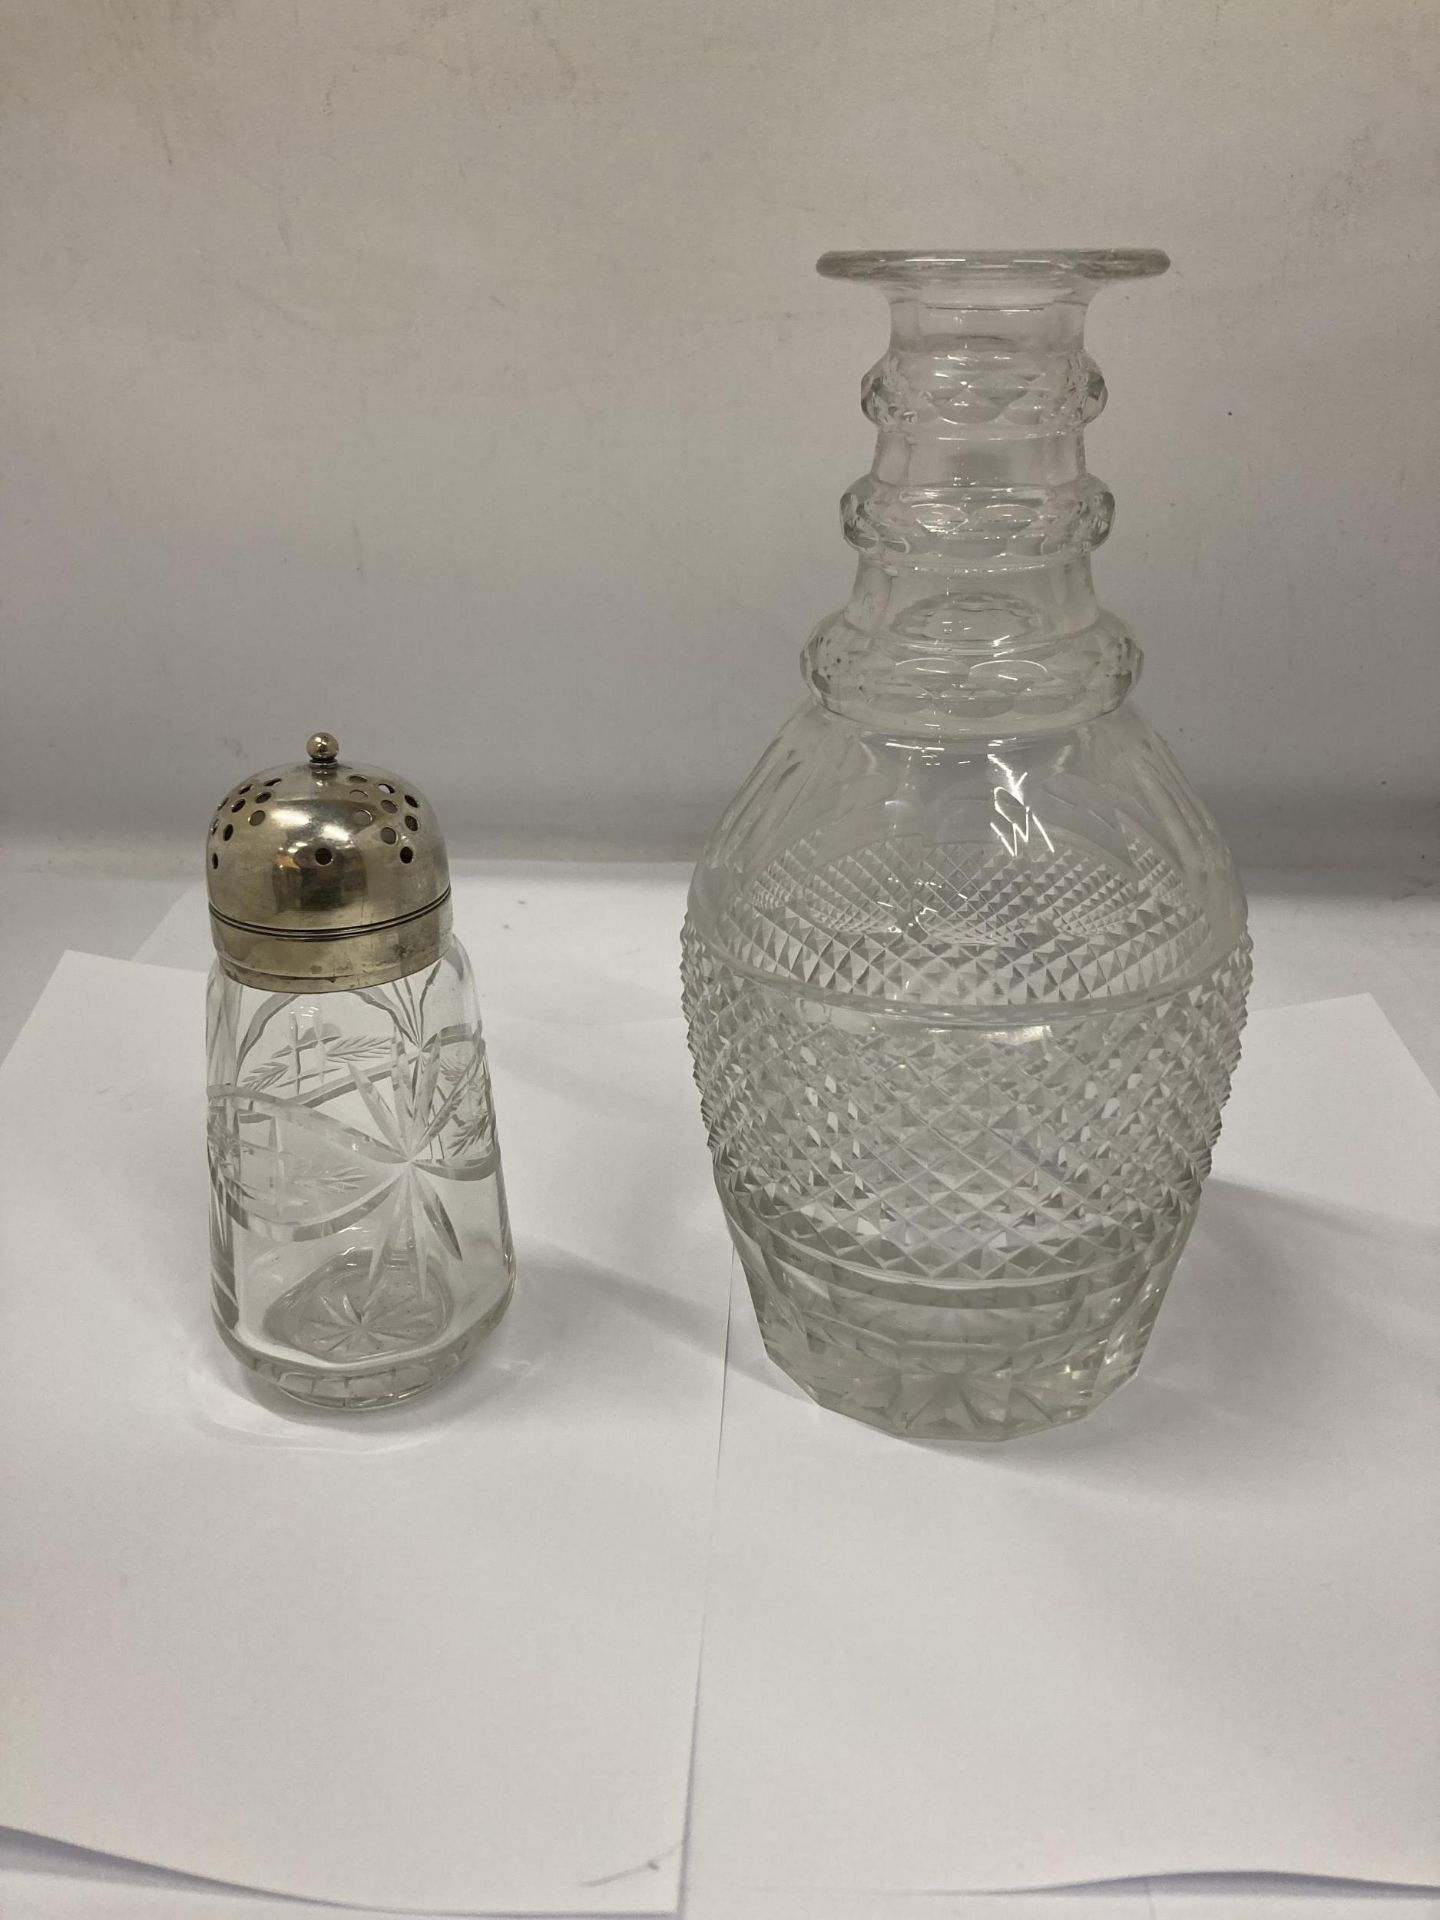 A GLASS DECANTER AND A SUGAR SIFTER WITH PLATED LID